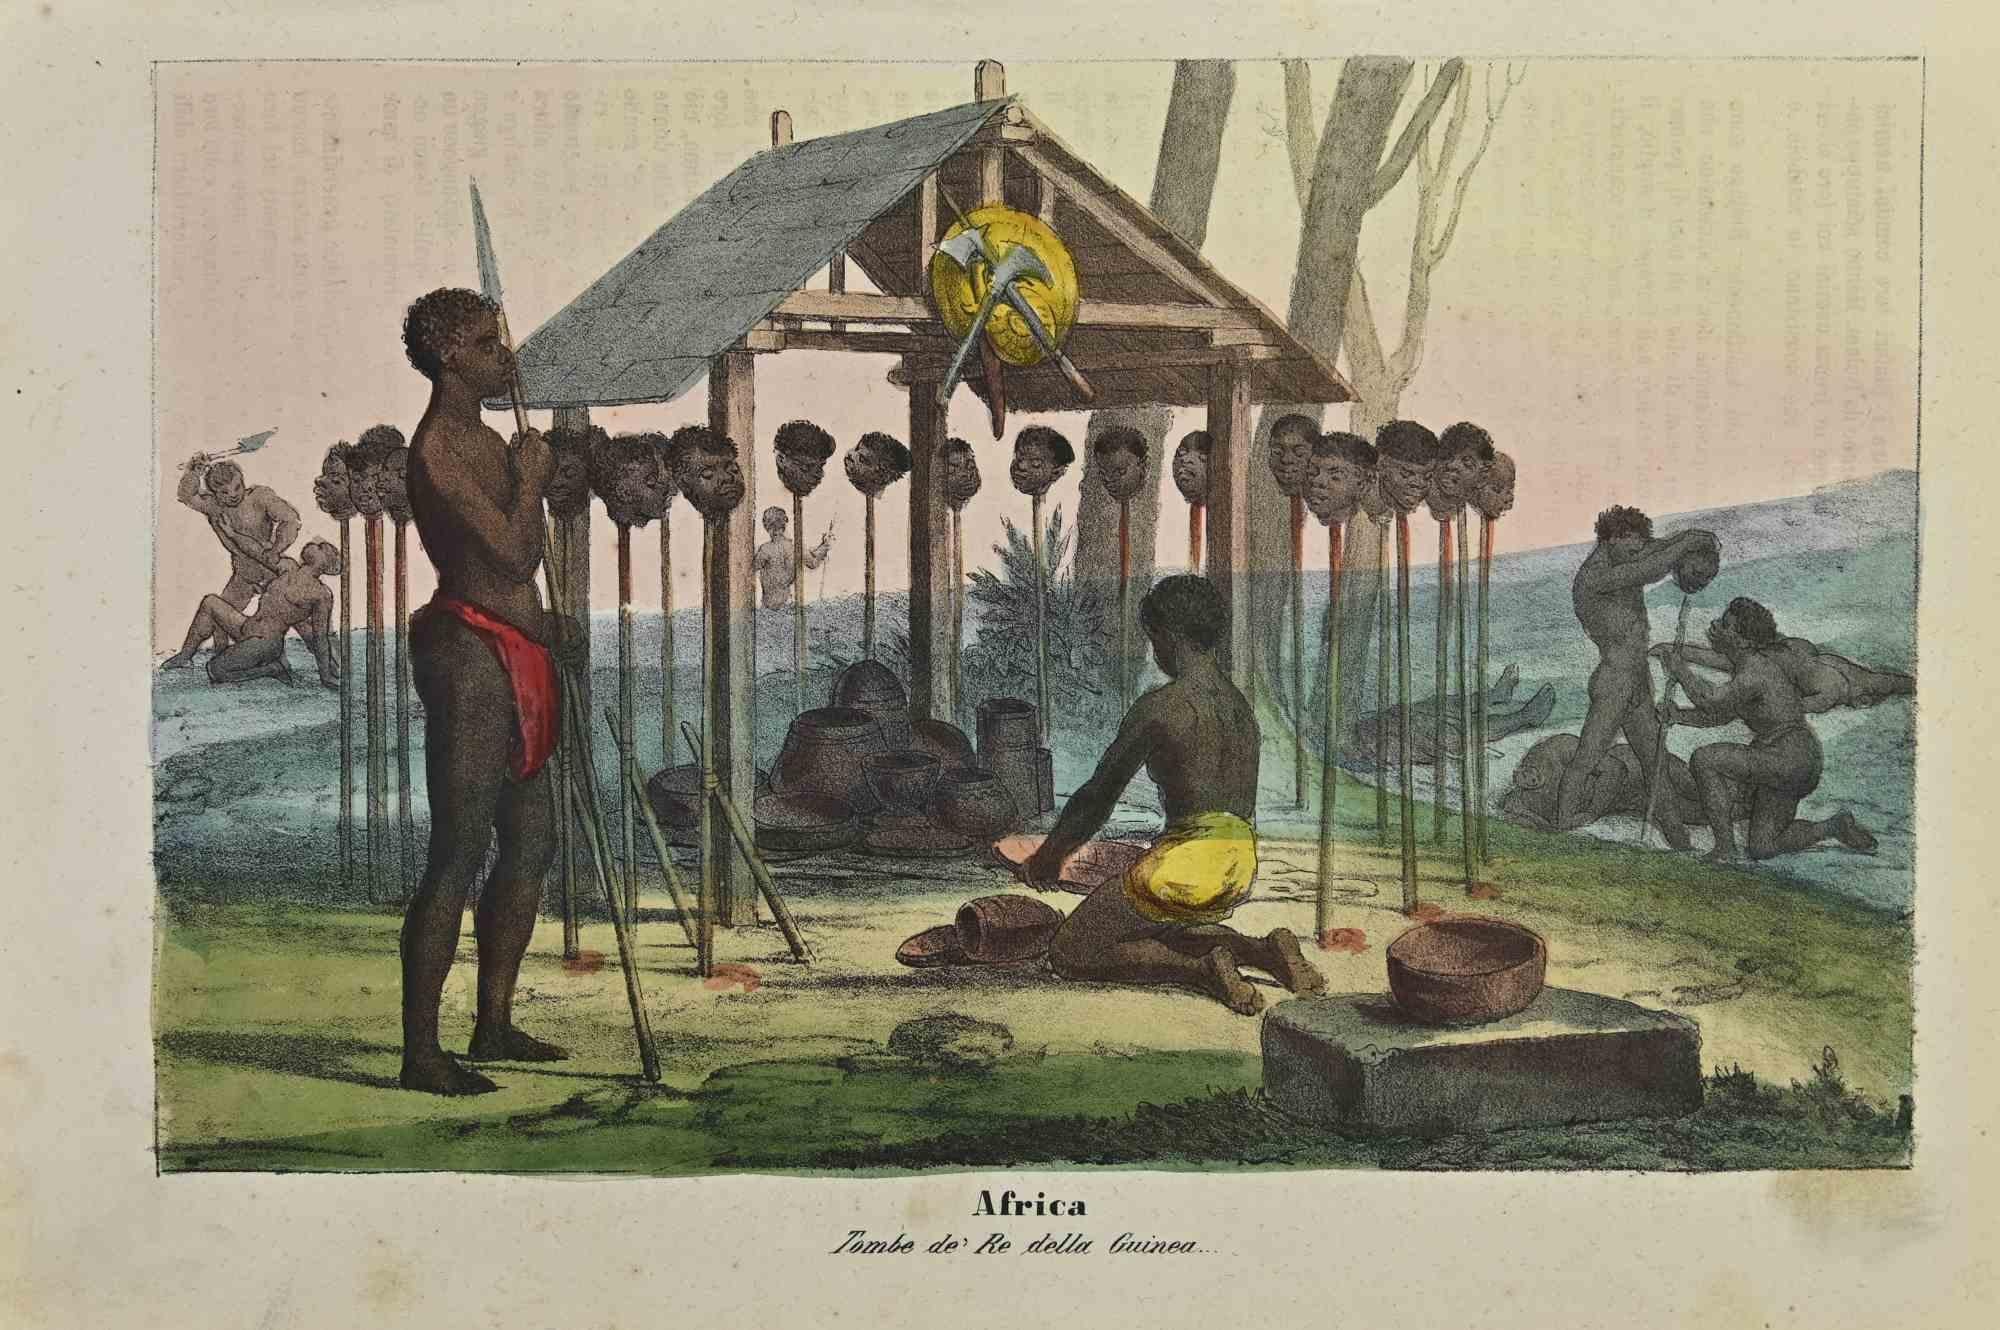 Ancient African Customs is a lithograph made by Auguste Wahlen in 1844.

Hand colored.

Good condition.

At the center of the artwork is the original title "Africa" and subtitle "Tombe de' Re della Guinea" (translated, "Tombs of King of